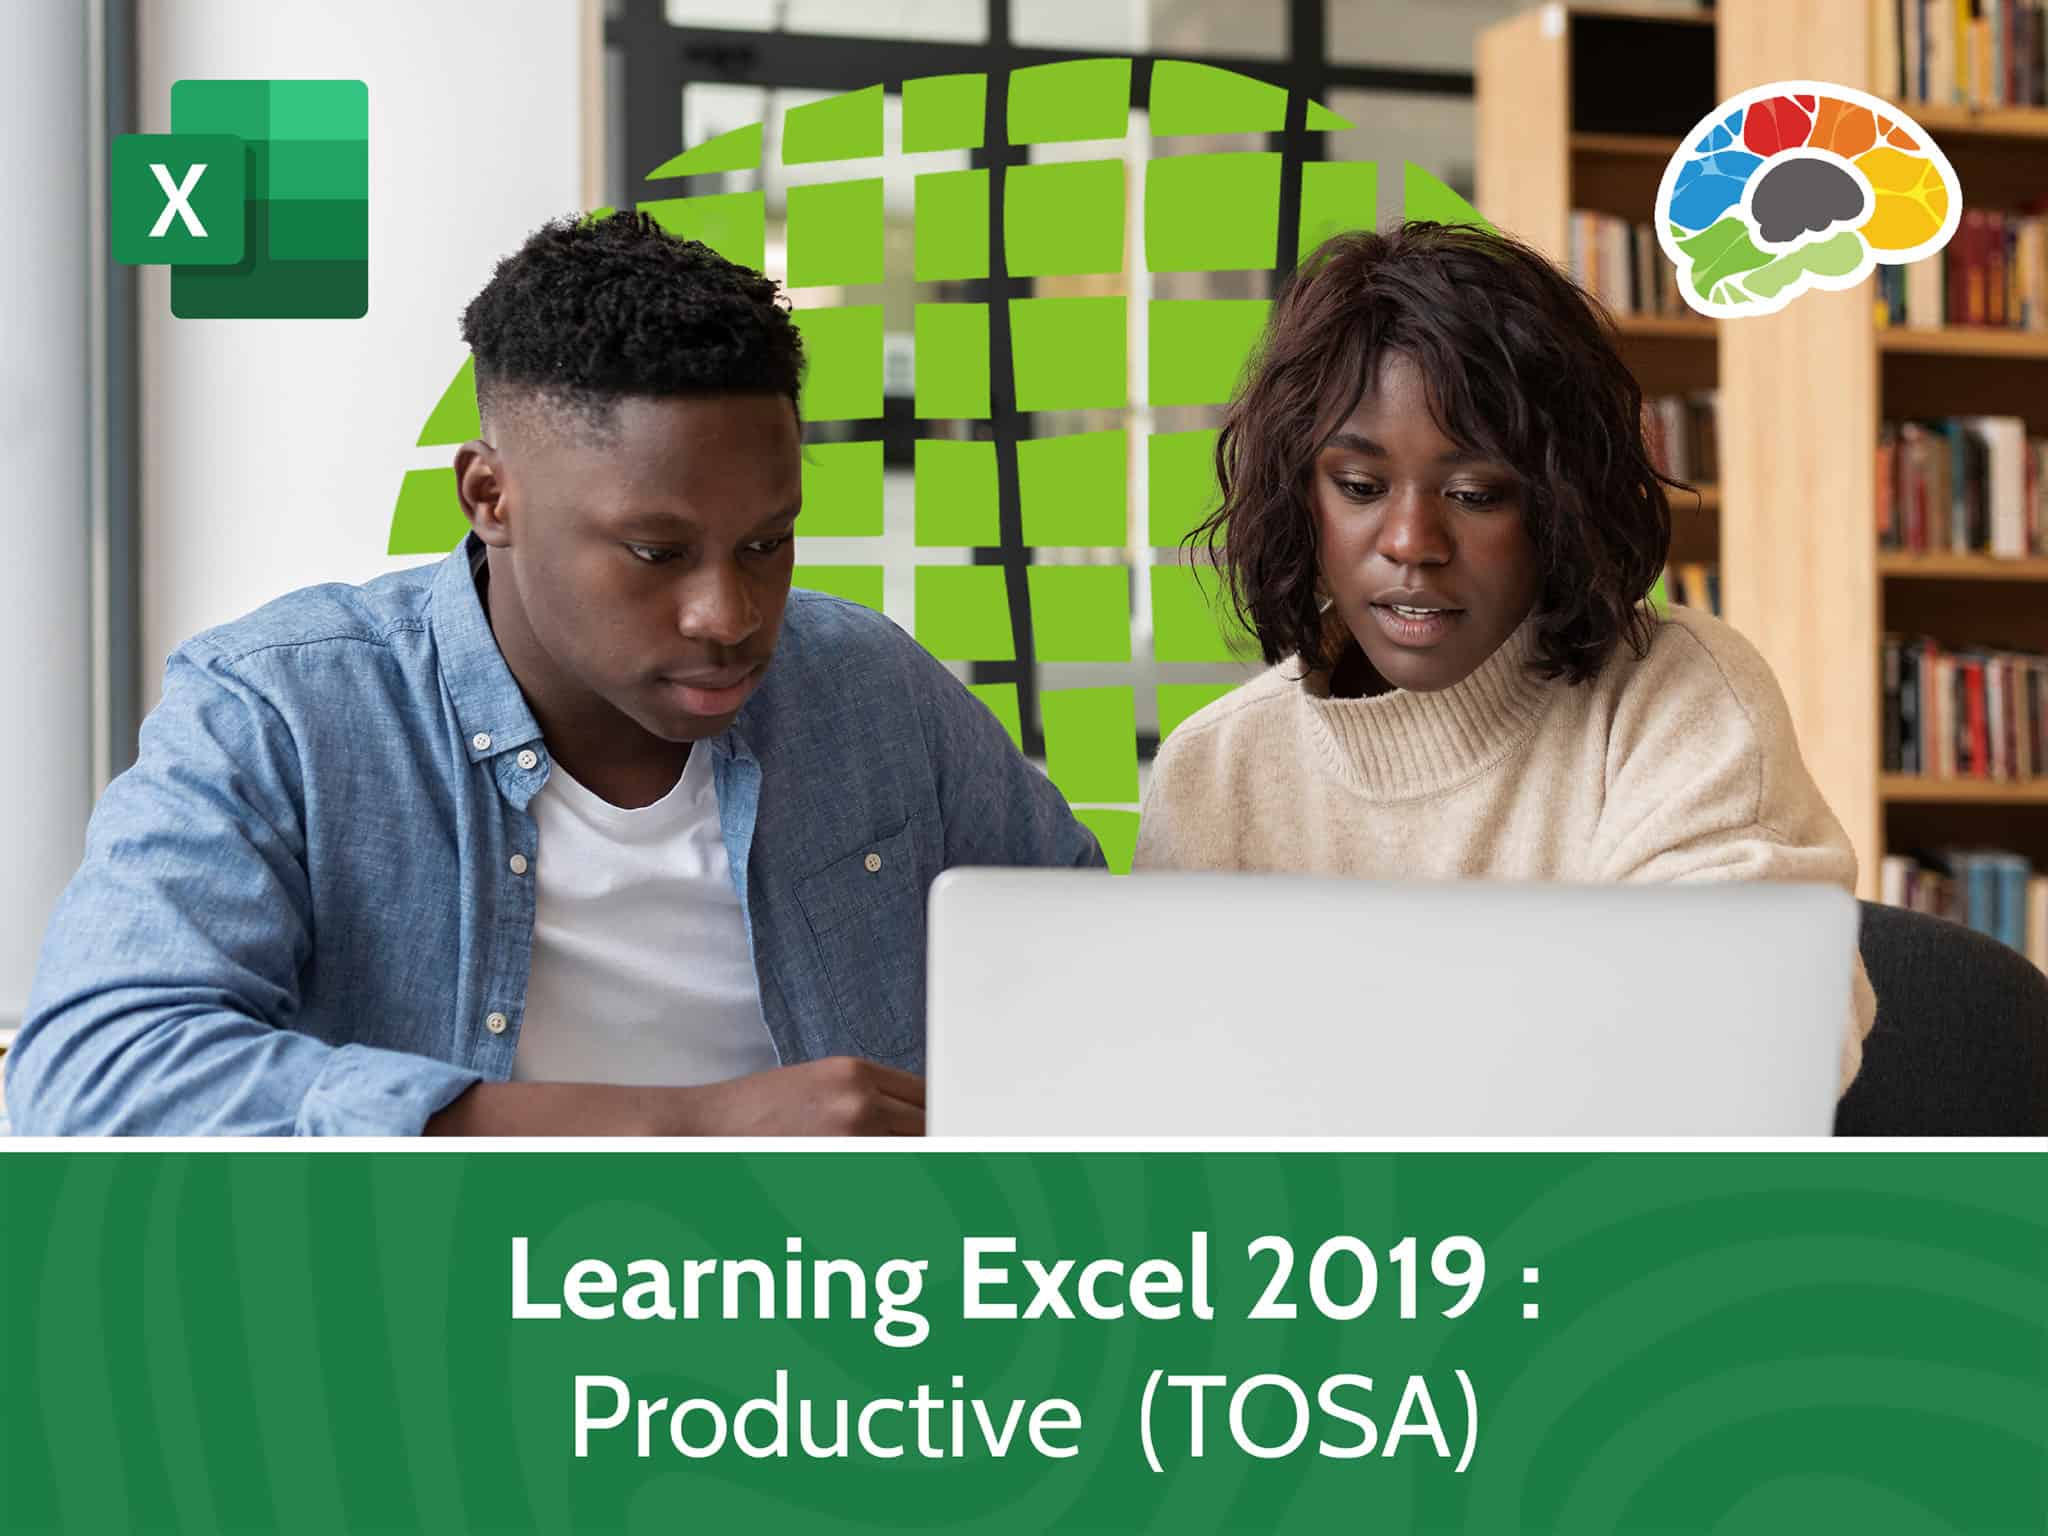 Learning Excel 2019 – Productive TOSA scaled